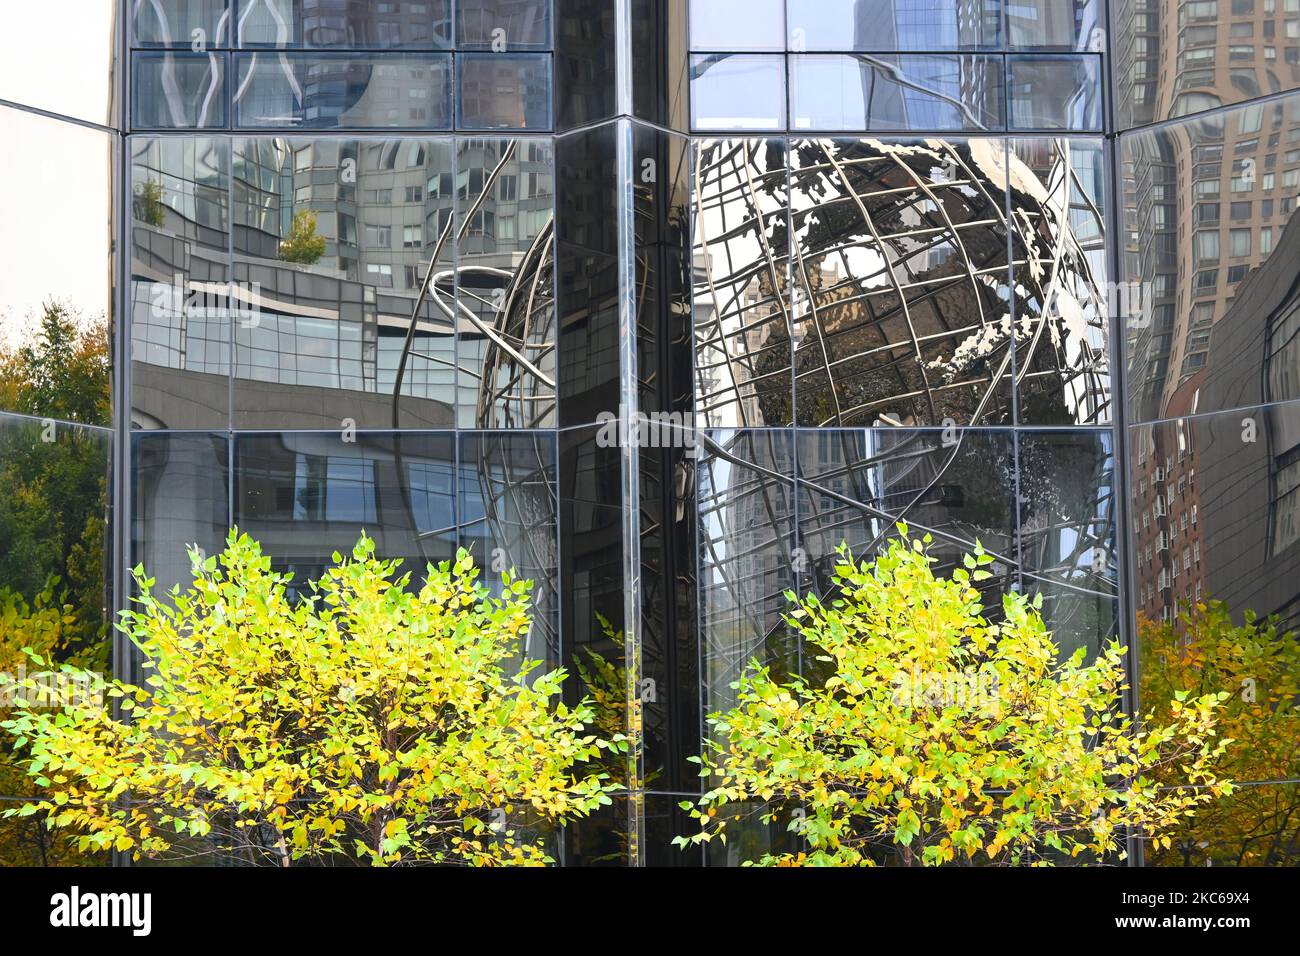 NEW YORK - 23 OCT 2022: The Steel Globe at Columbus Circle reflection in the side of the Trump International Hotel and Tower, with trees in fall folia Stock Photo